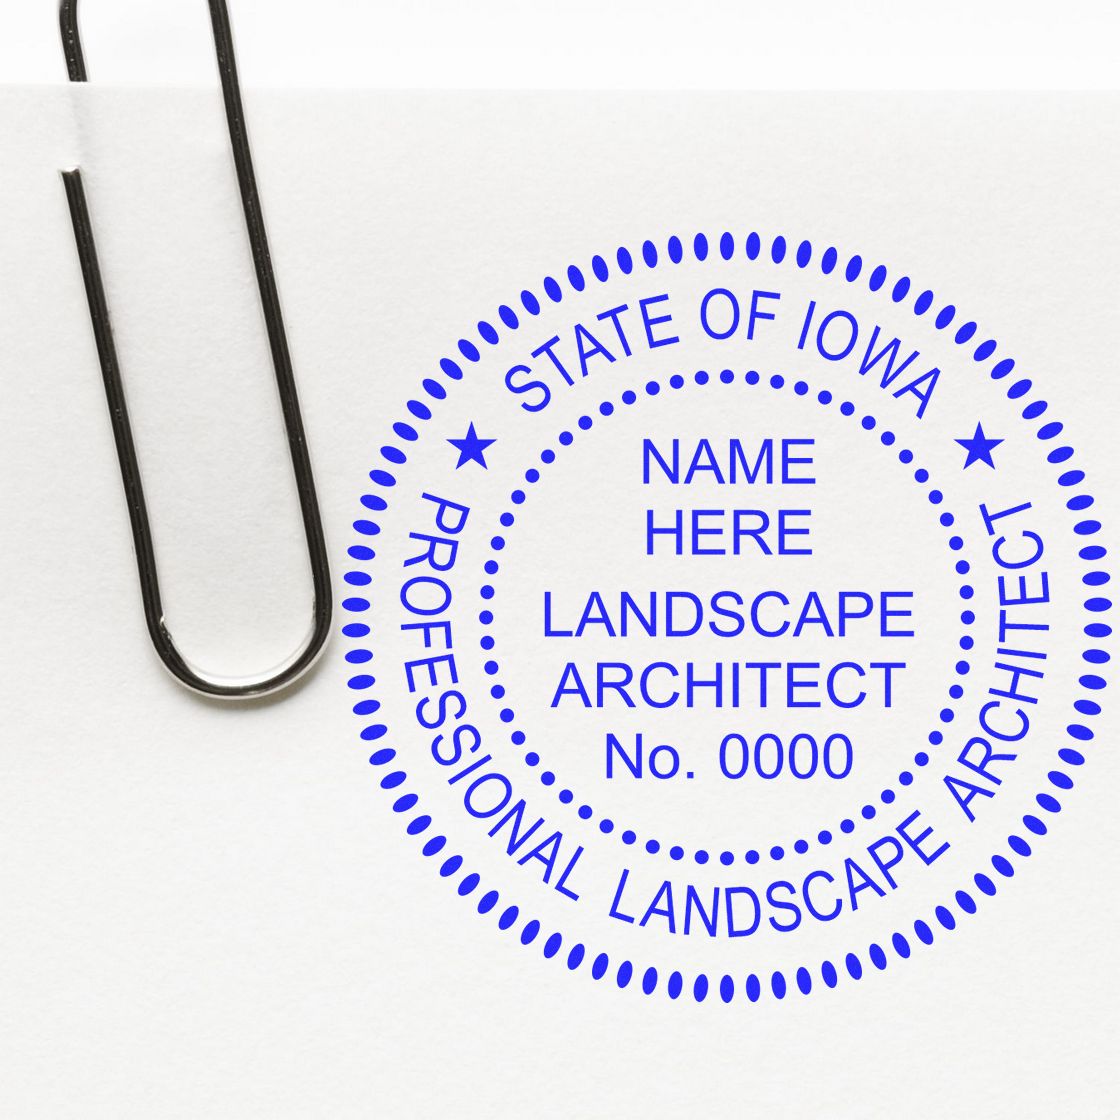 This paper is stamped with a sample imprint of the Self-Inking Iowa Landscape Architect Stamp, signifying its quality and reliability.